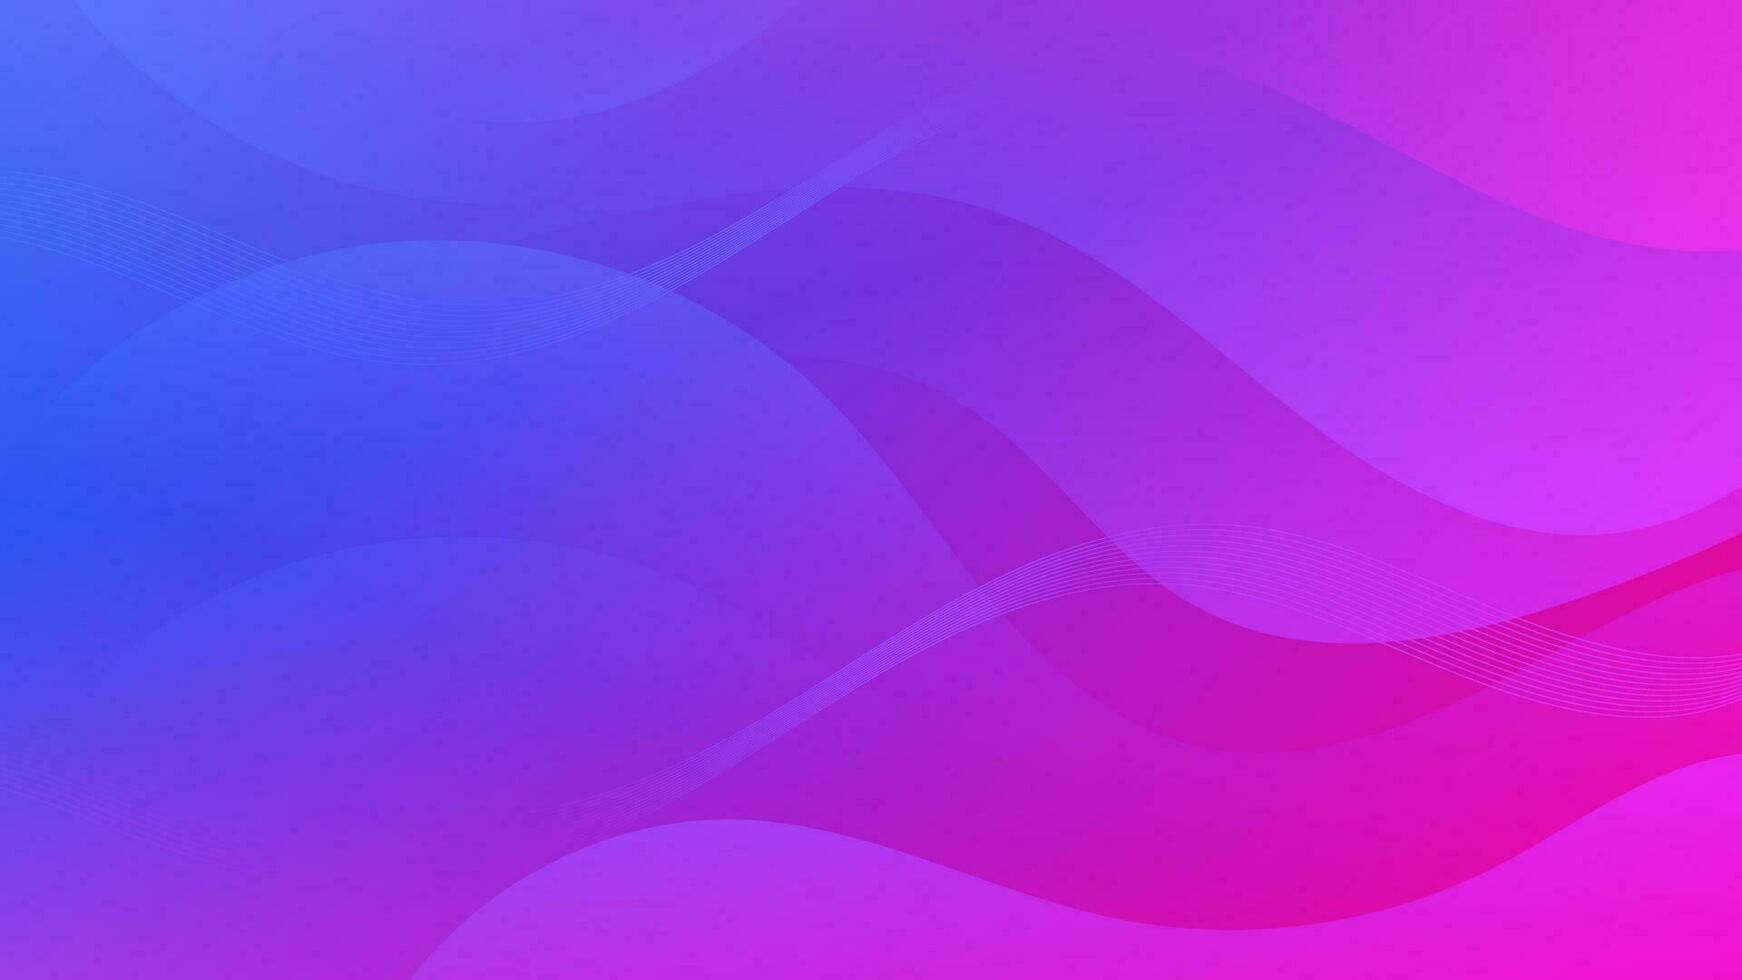 Abstract Gradient  Purple Blue  liquid background. Modern  background design. Dynamic Waves. Fluid shapes composition.  Fit for website, banners, brochure, posters vector